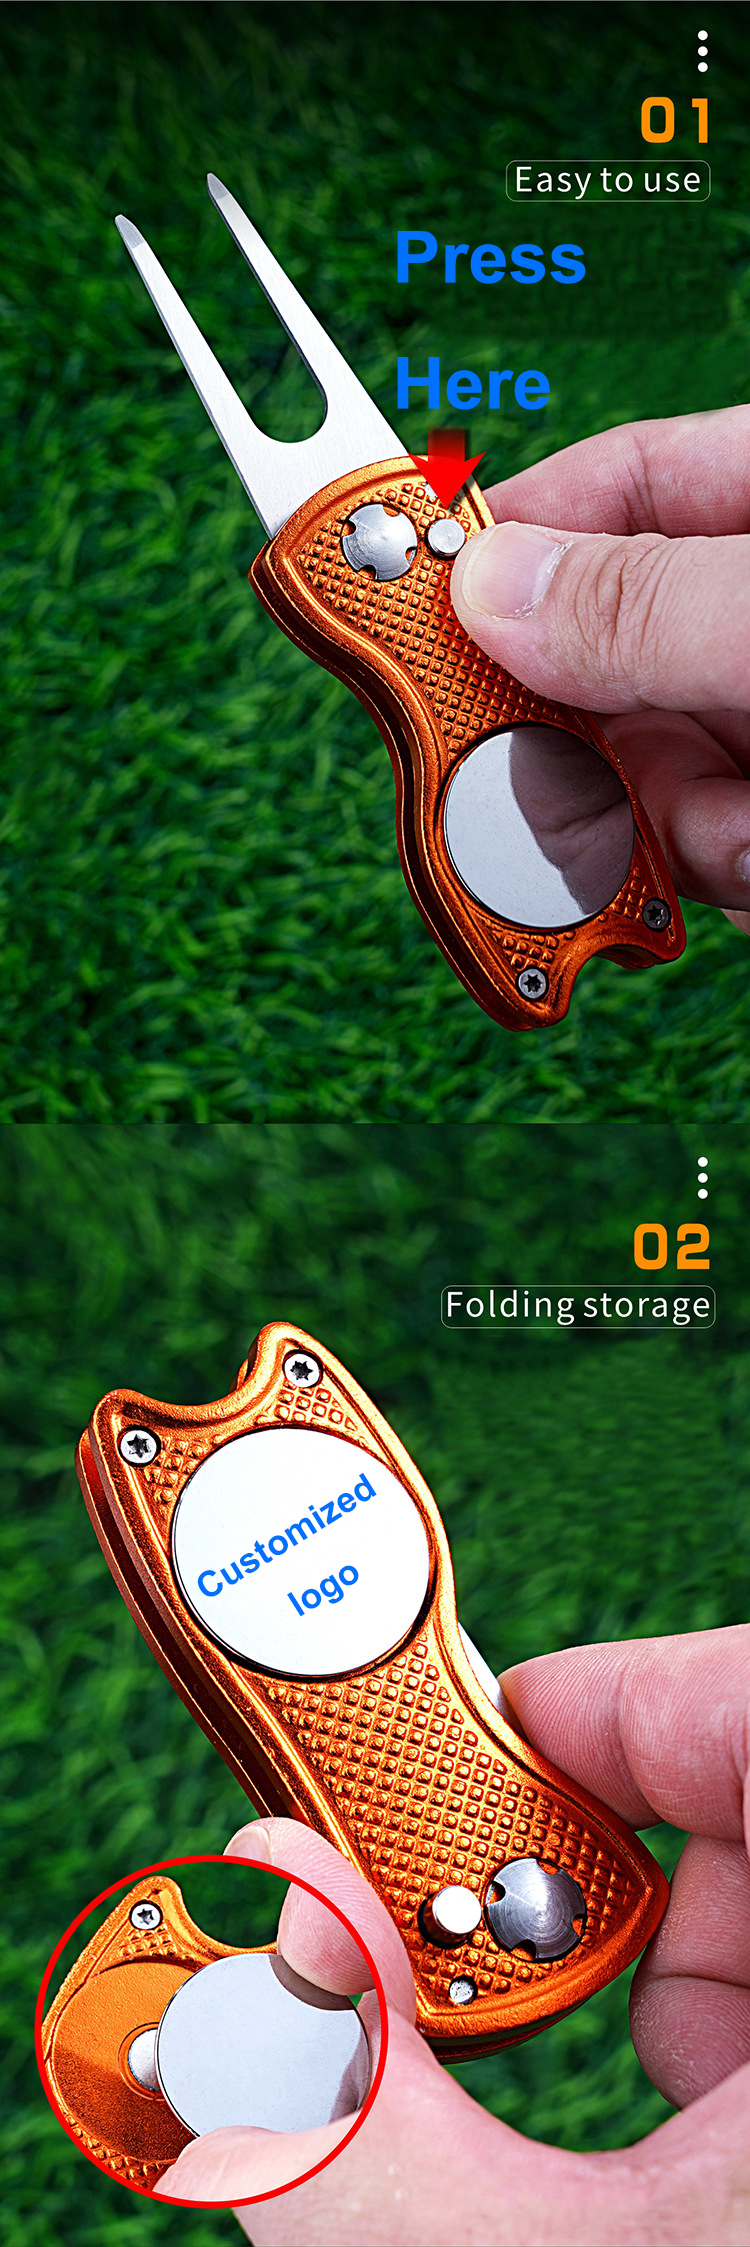 how to use divot tool